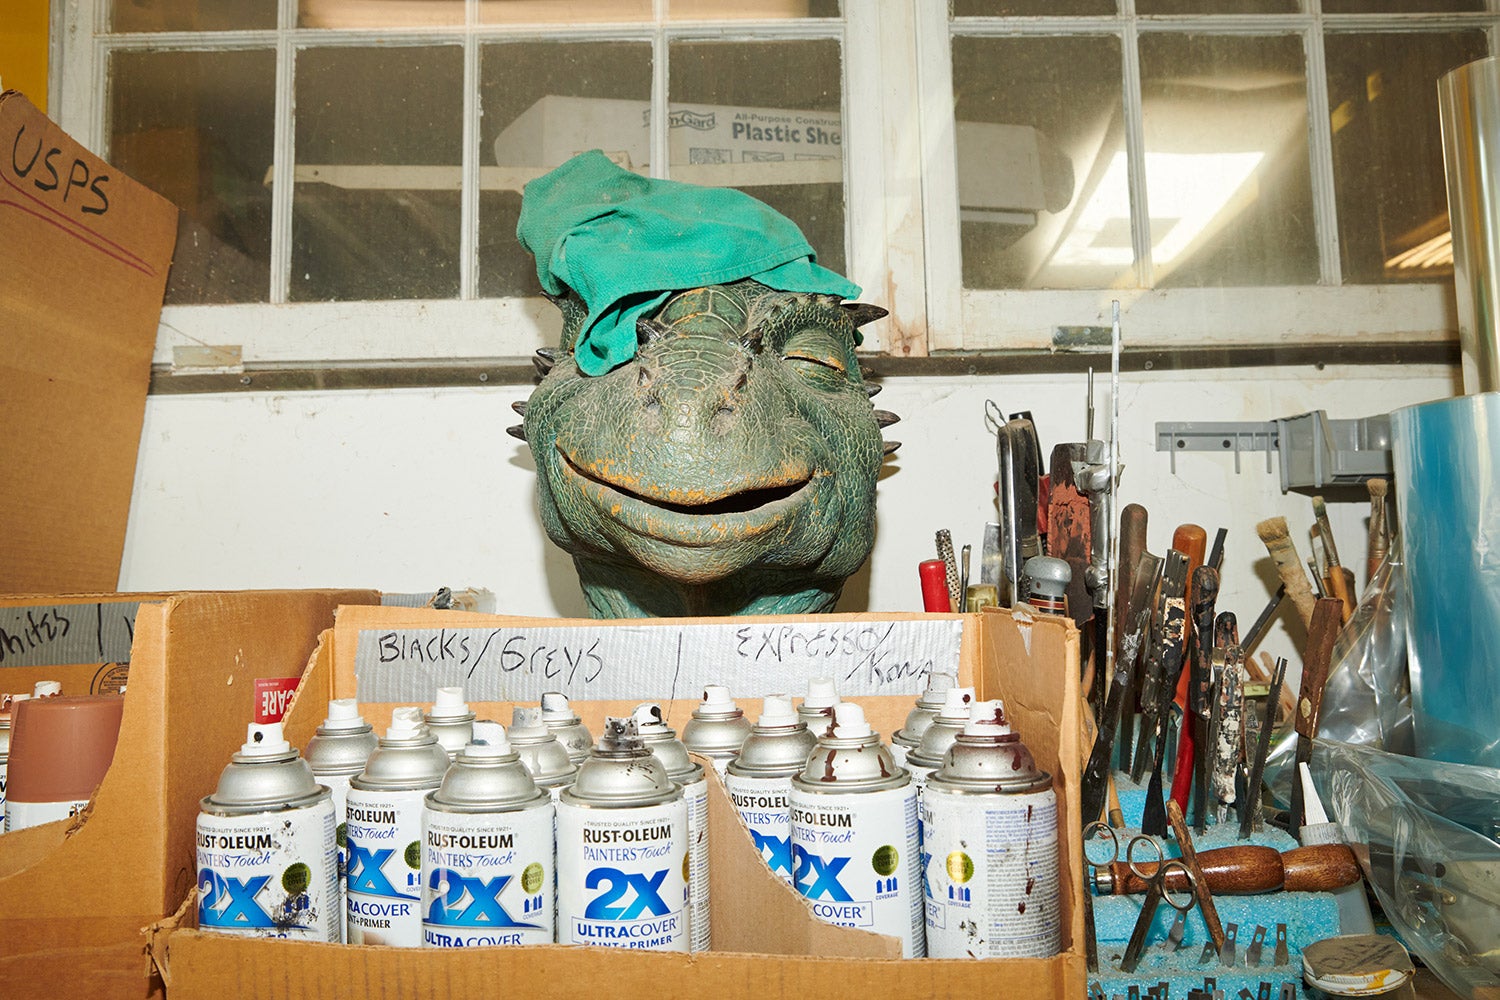 head of dinosaur sculpture sits behind pray paint and next to tools in workshop storage area.